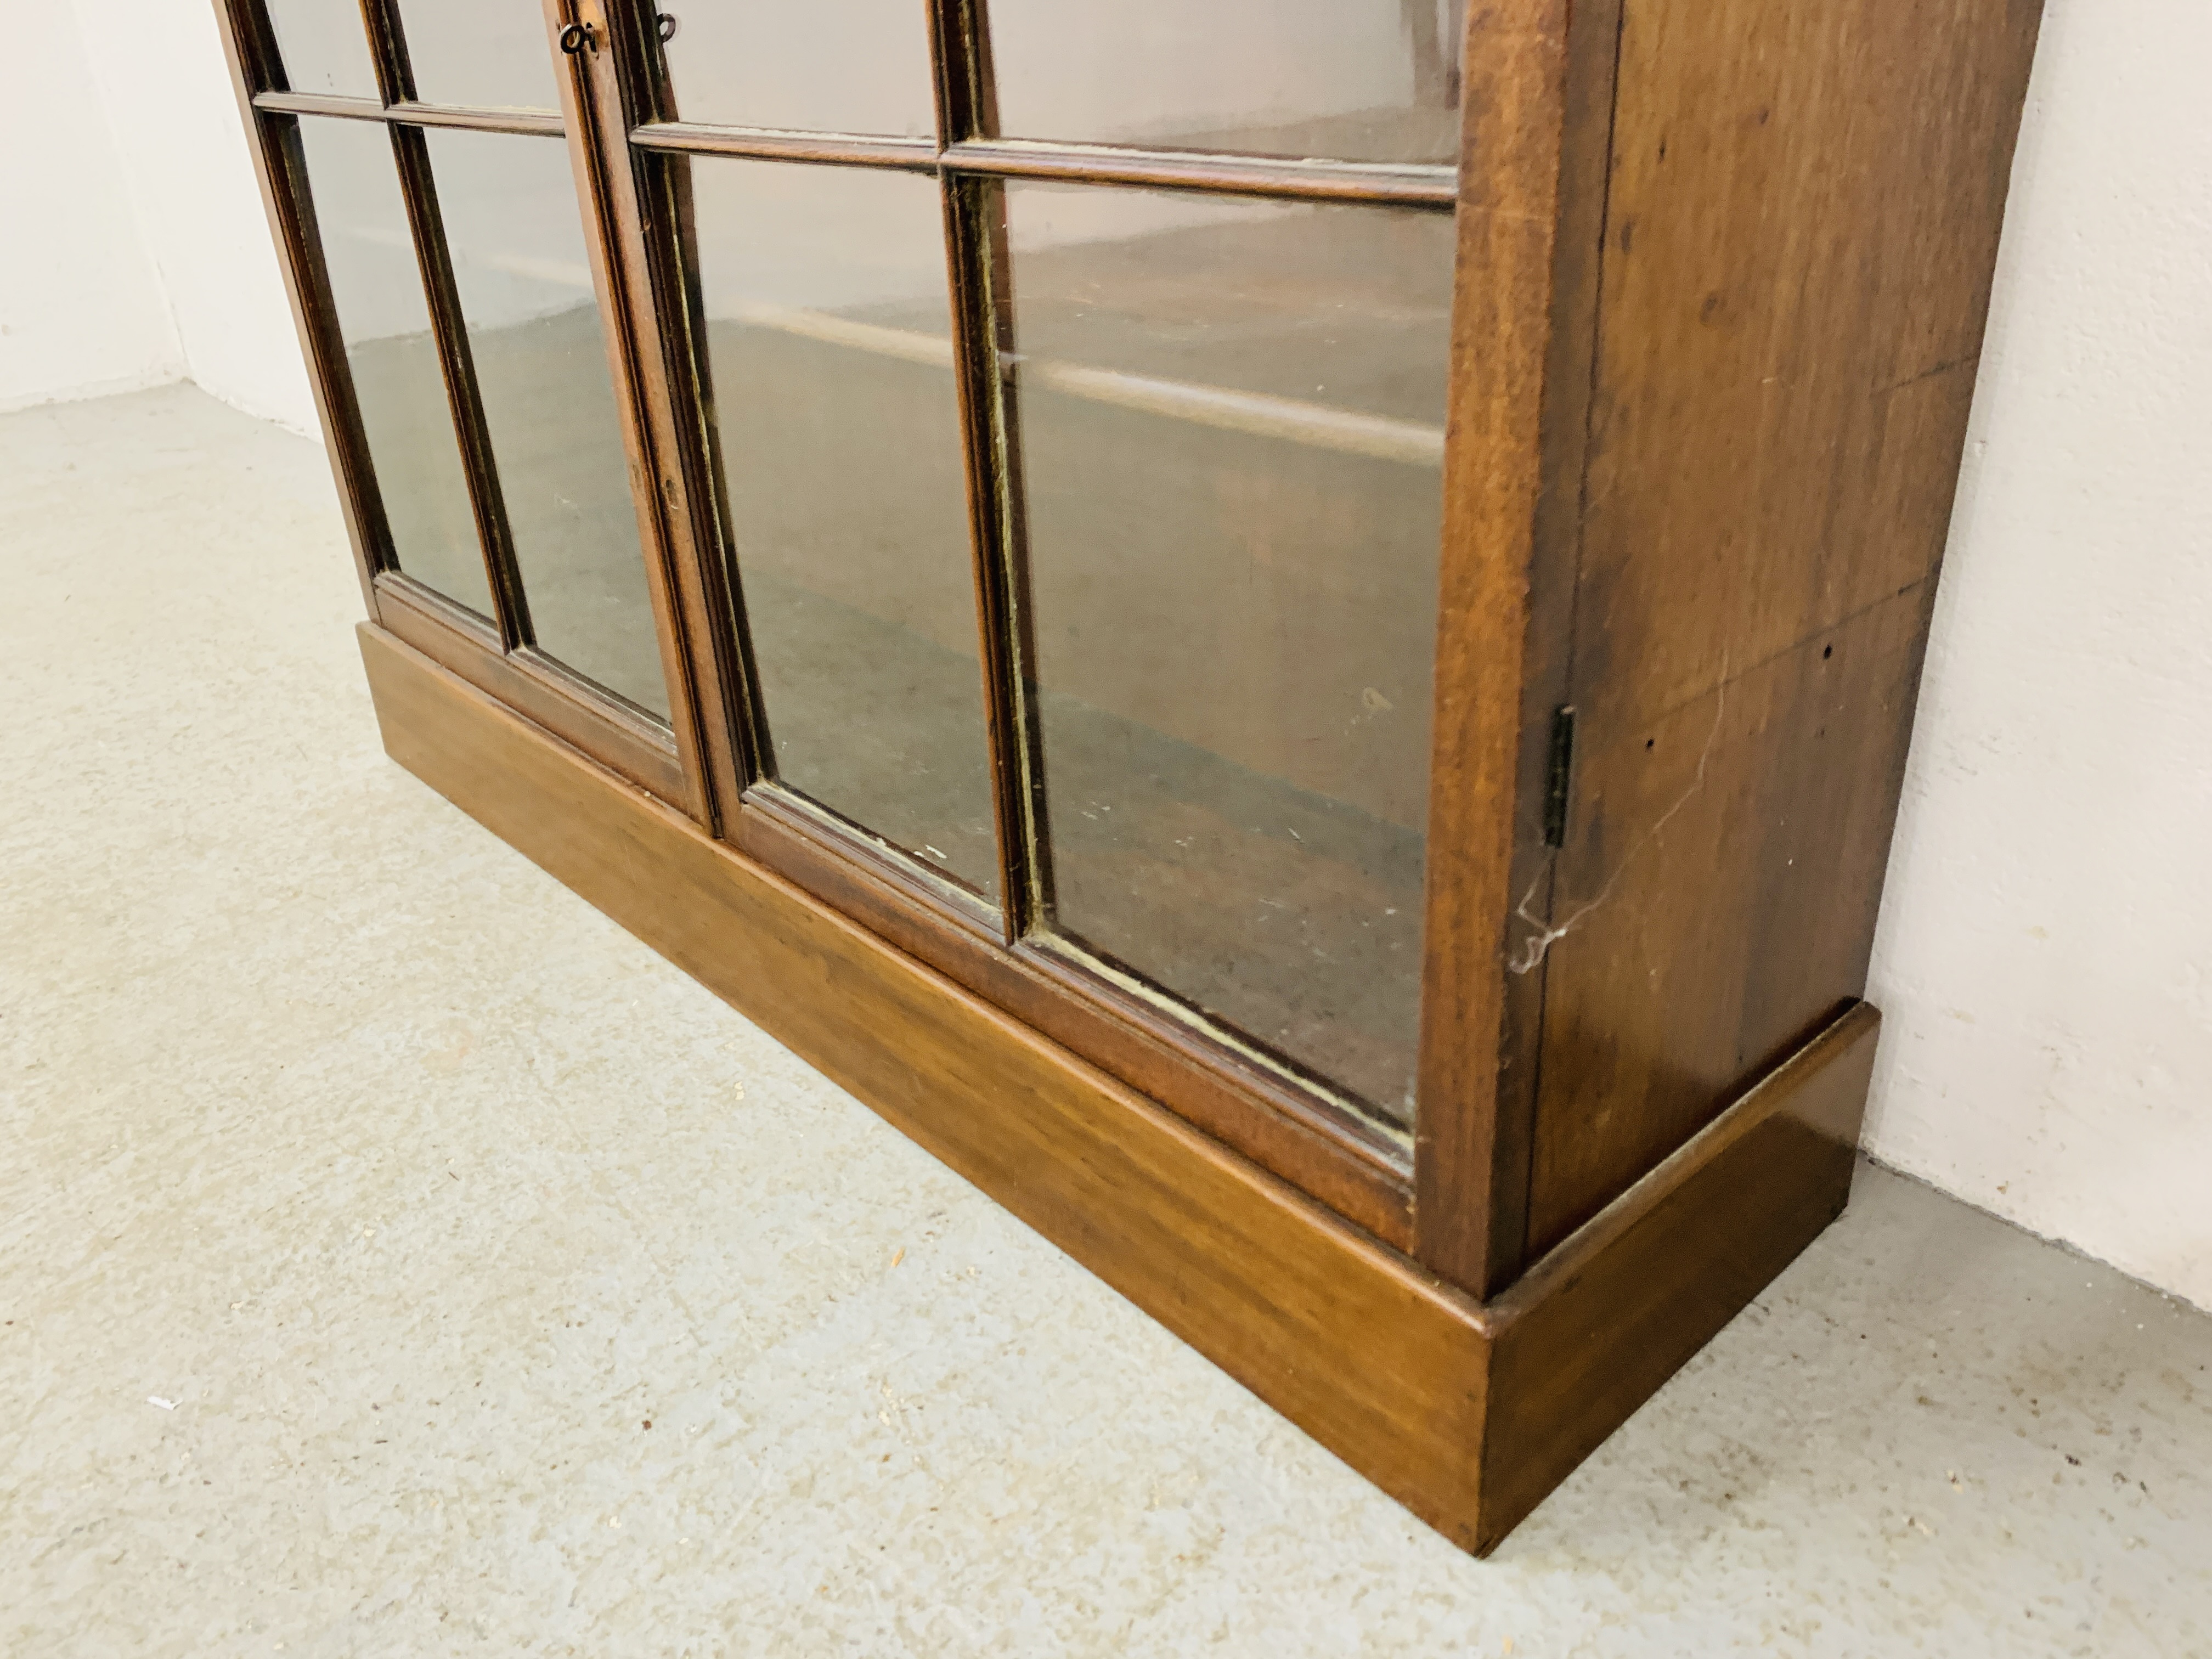 A MAHOGANY TWO DOOR GLAZED DISPLAY CABINET, BEING A TOP HALF OF A BOOKCASE, NOW CONVERTED - W 100CM. - Image 6 of 8